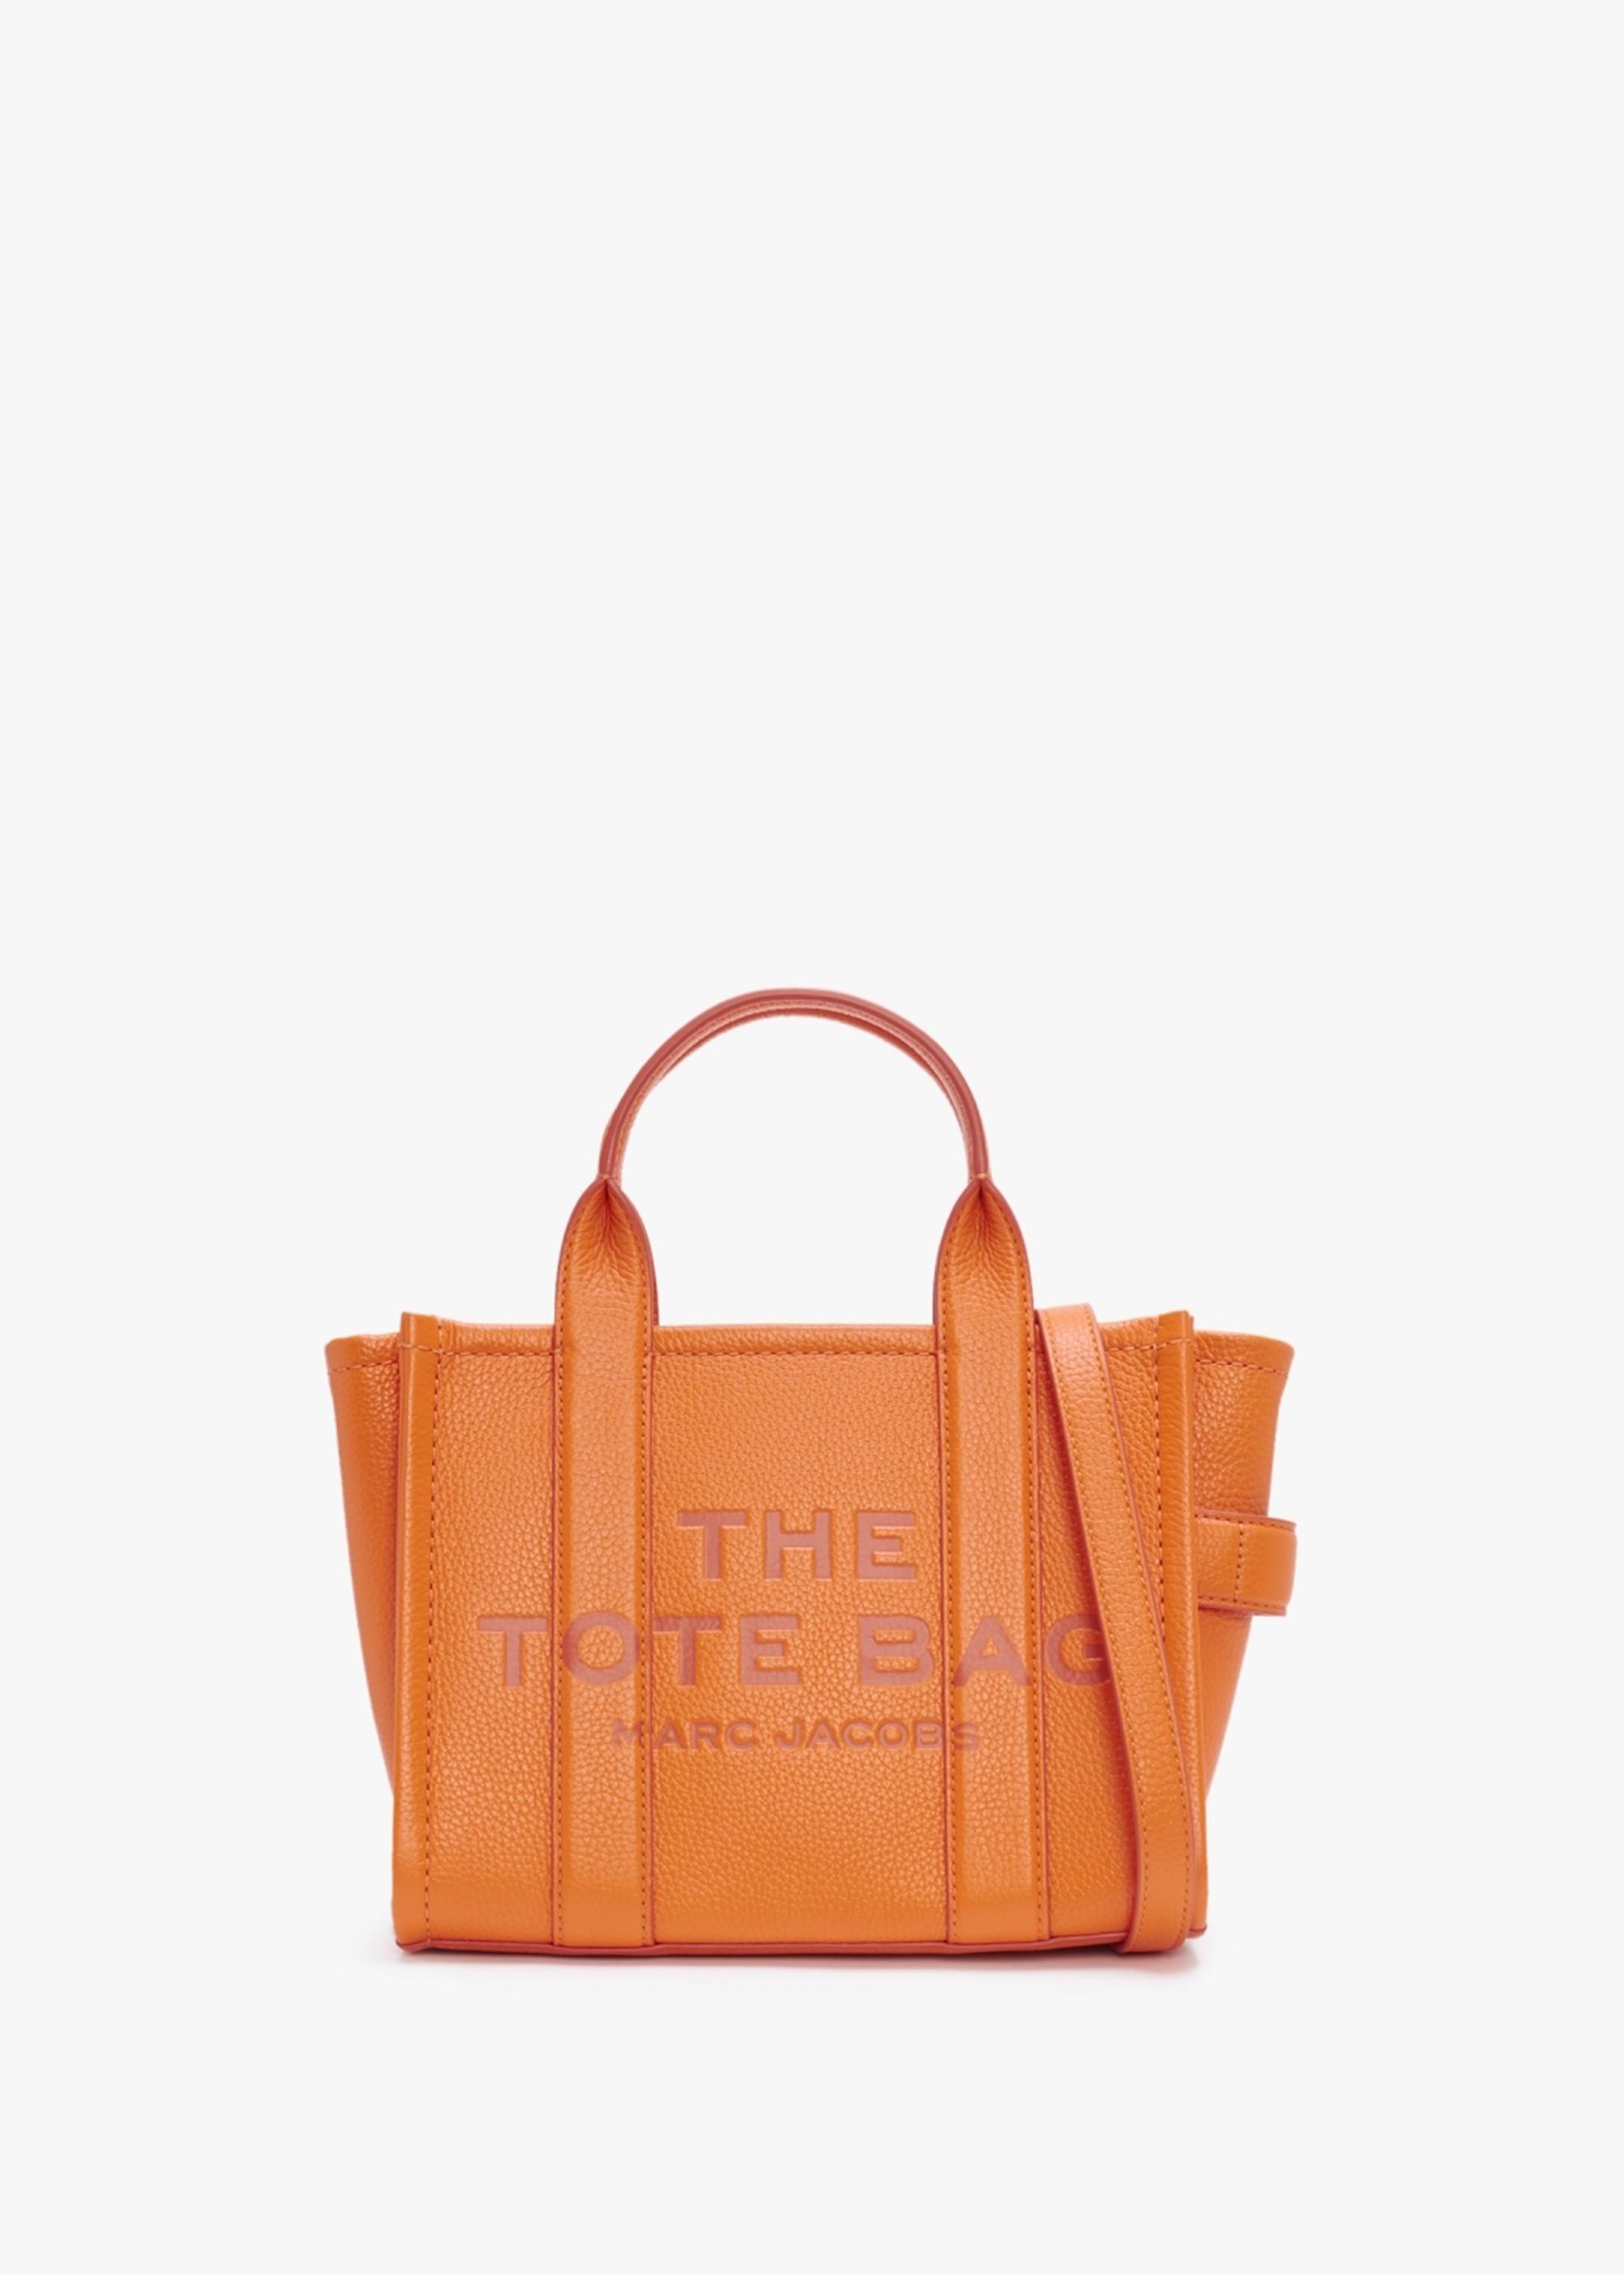  Marc Jacobs Women's The Small Tote, Scorched, Orange, One Size  : Clothing, Shoes & Jewelry